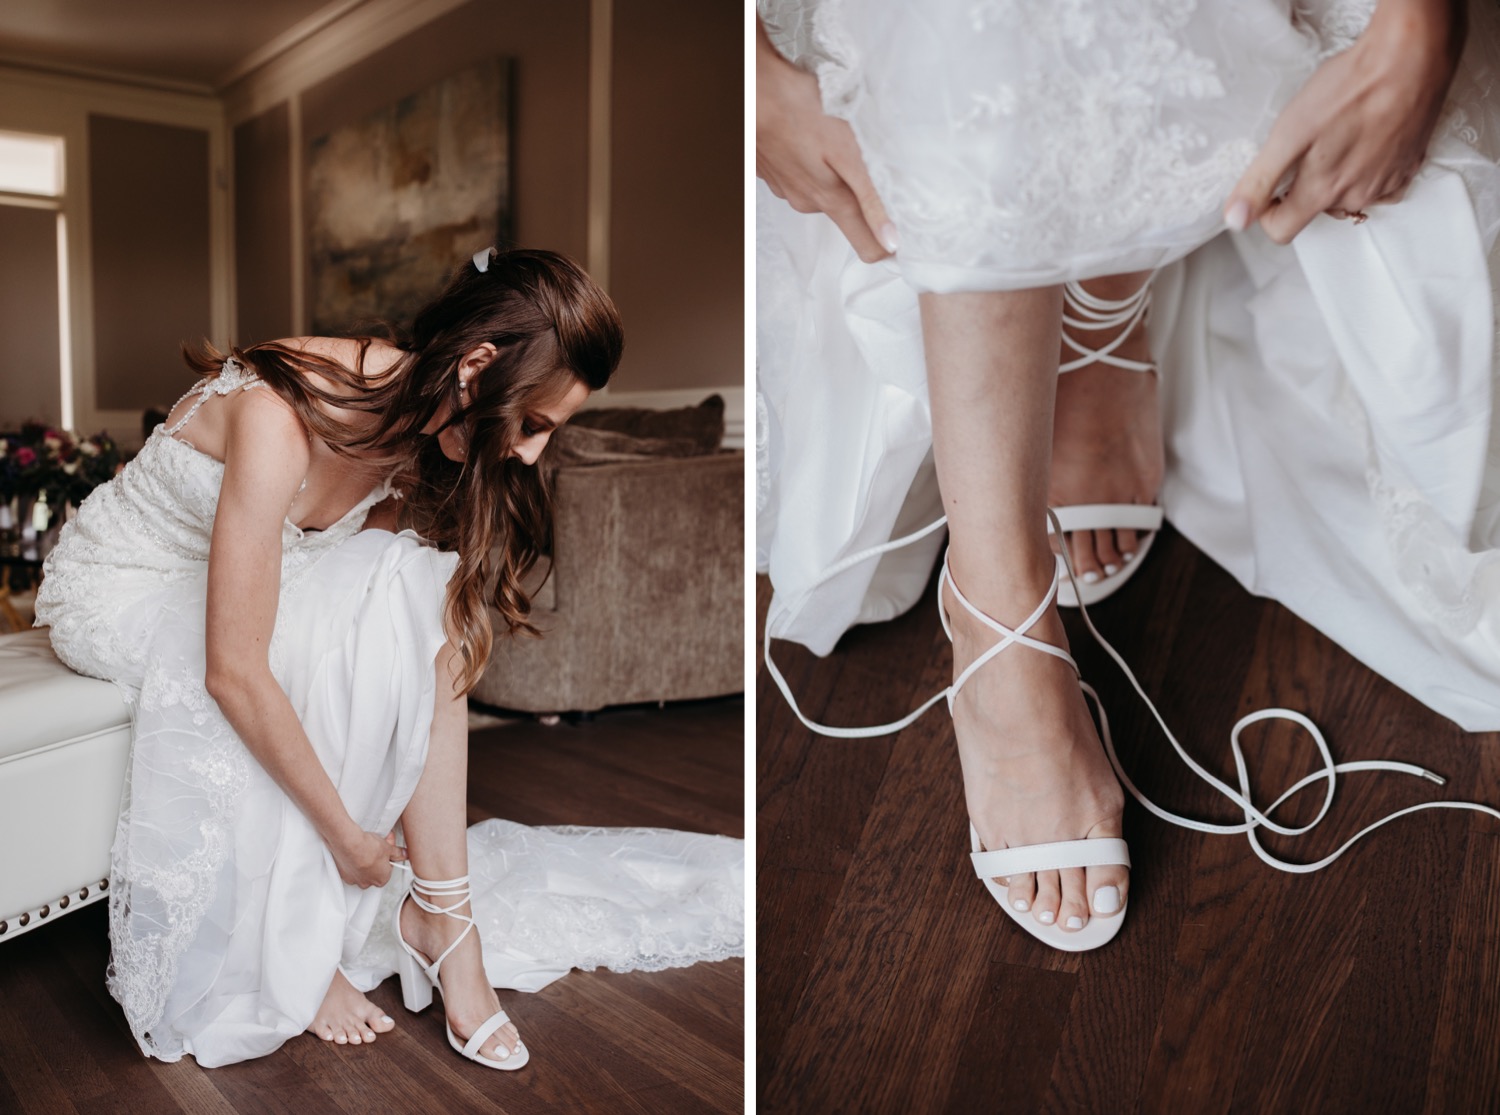 Bride laces up her wedding shoes as she gets ready for her wedding at The Maples in Woodland, CA